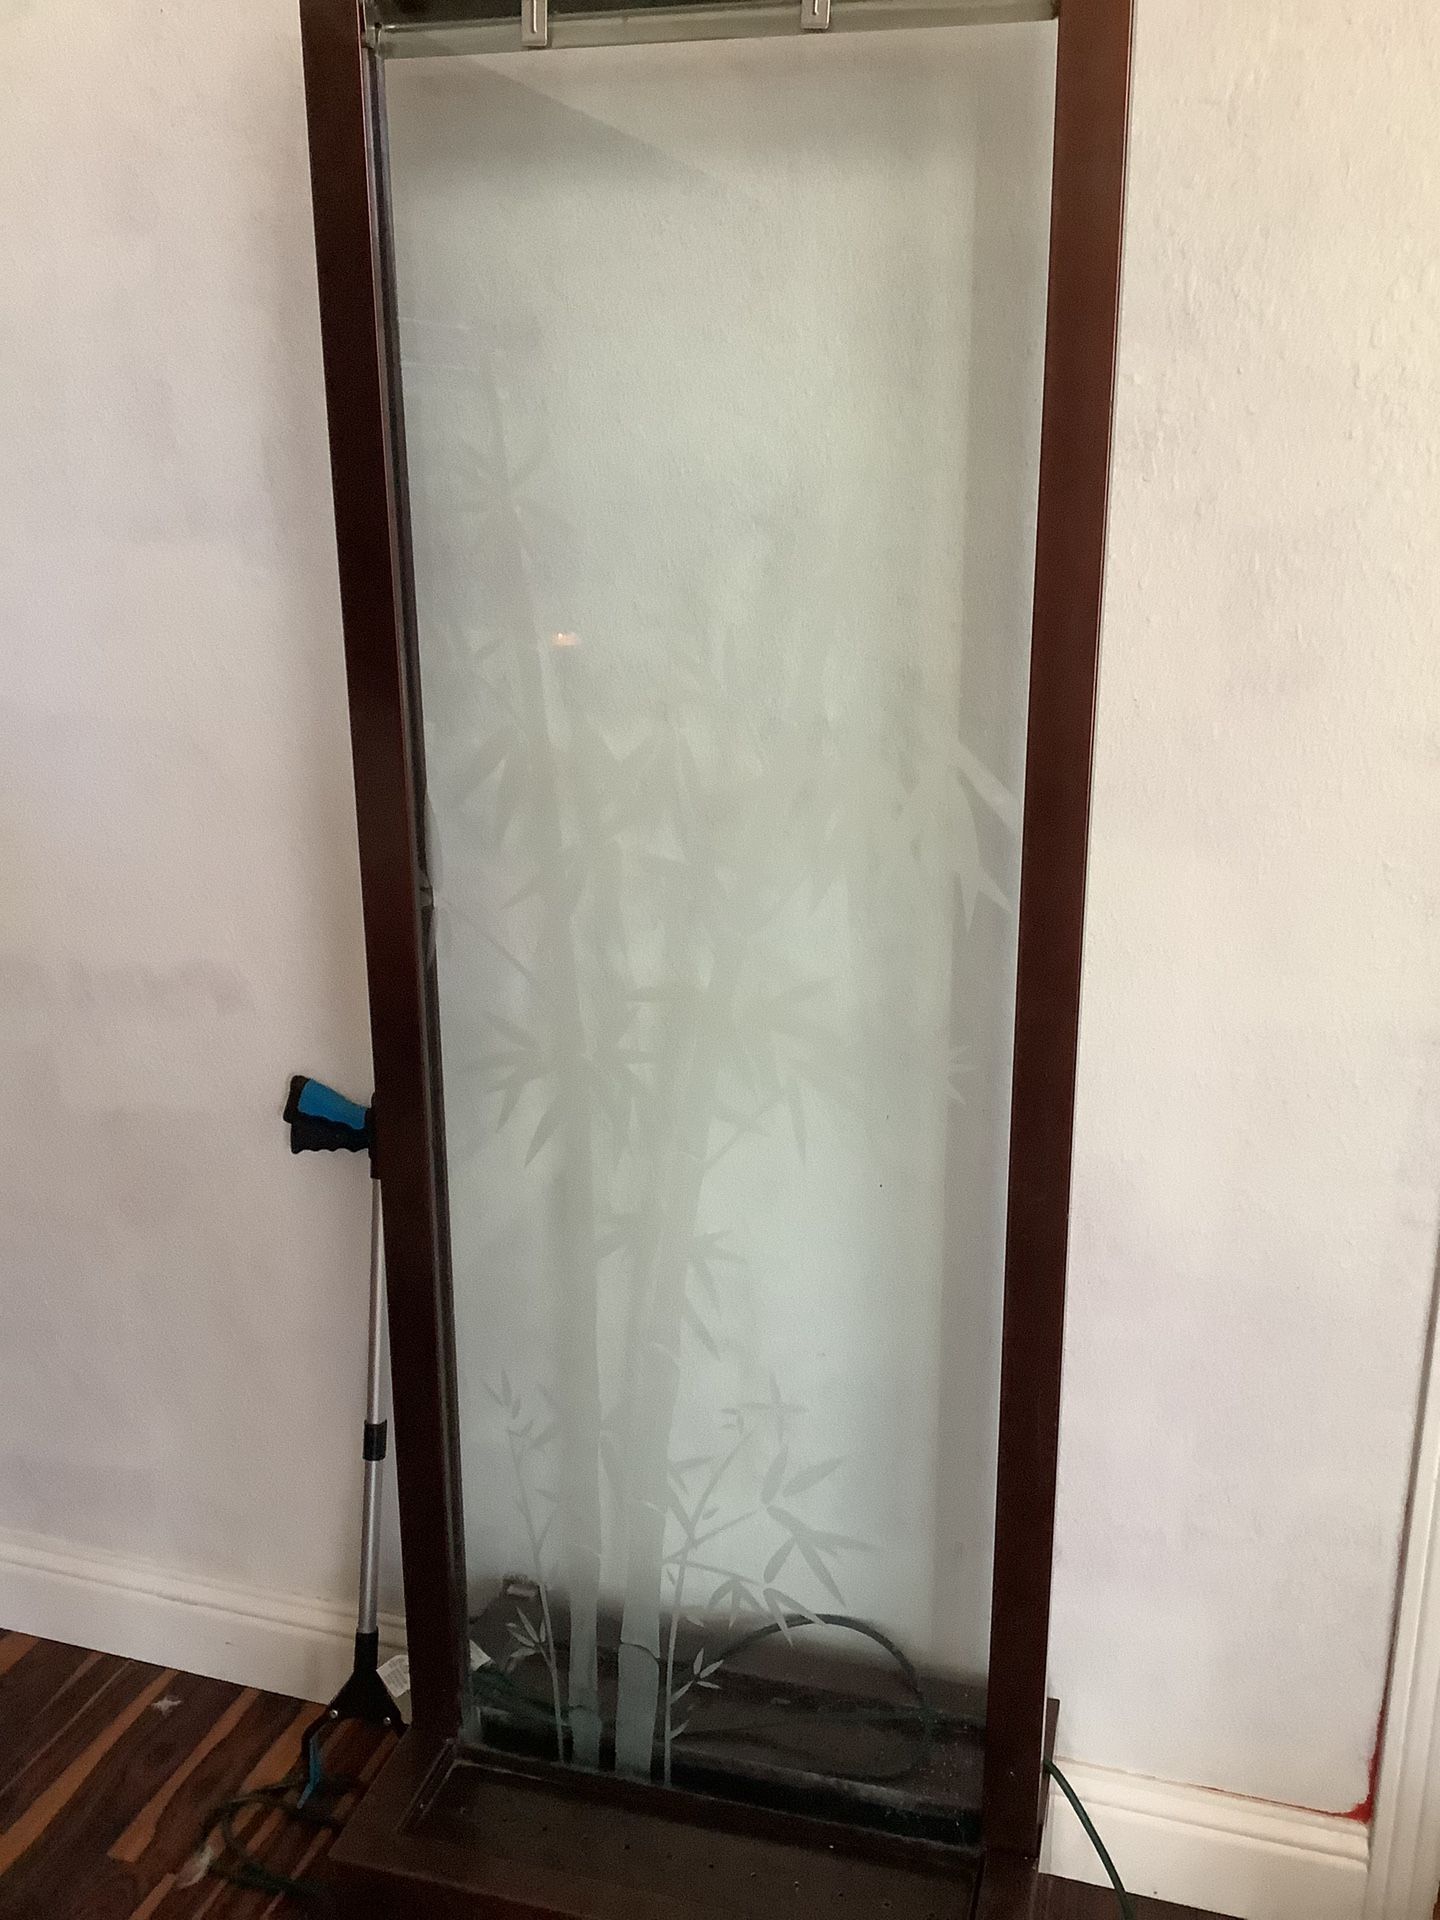 Water Fountain That Has Bamboo Etched Into Glass